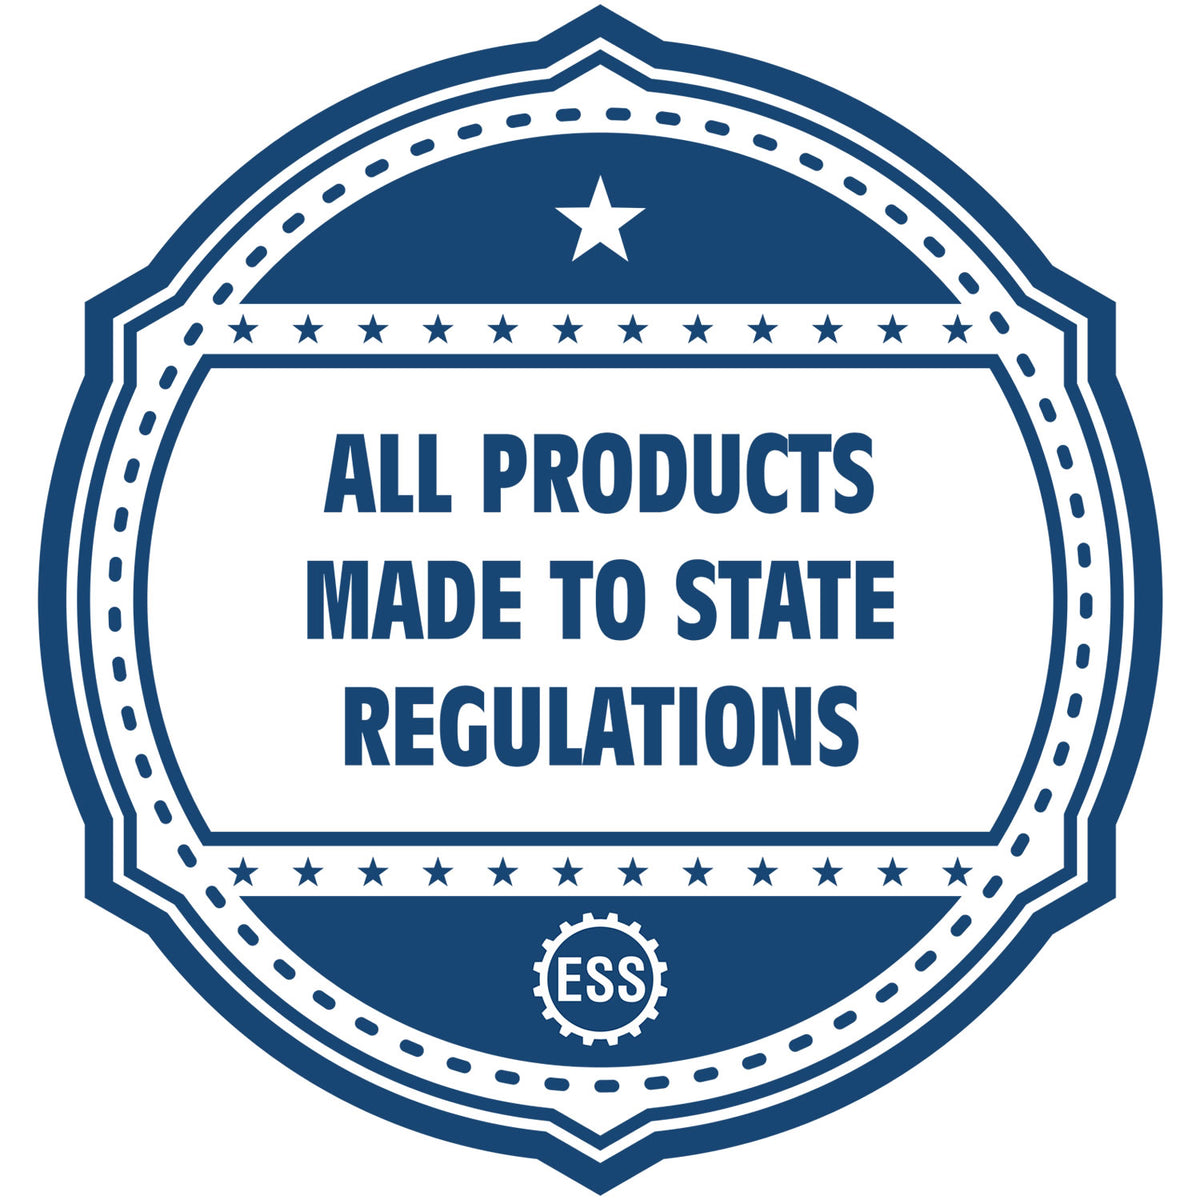 An icon or badge element for the Minnesota Desk Surveyor Seal Embosser showing that this product is made in compliance with state regulations.